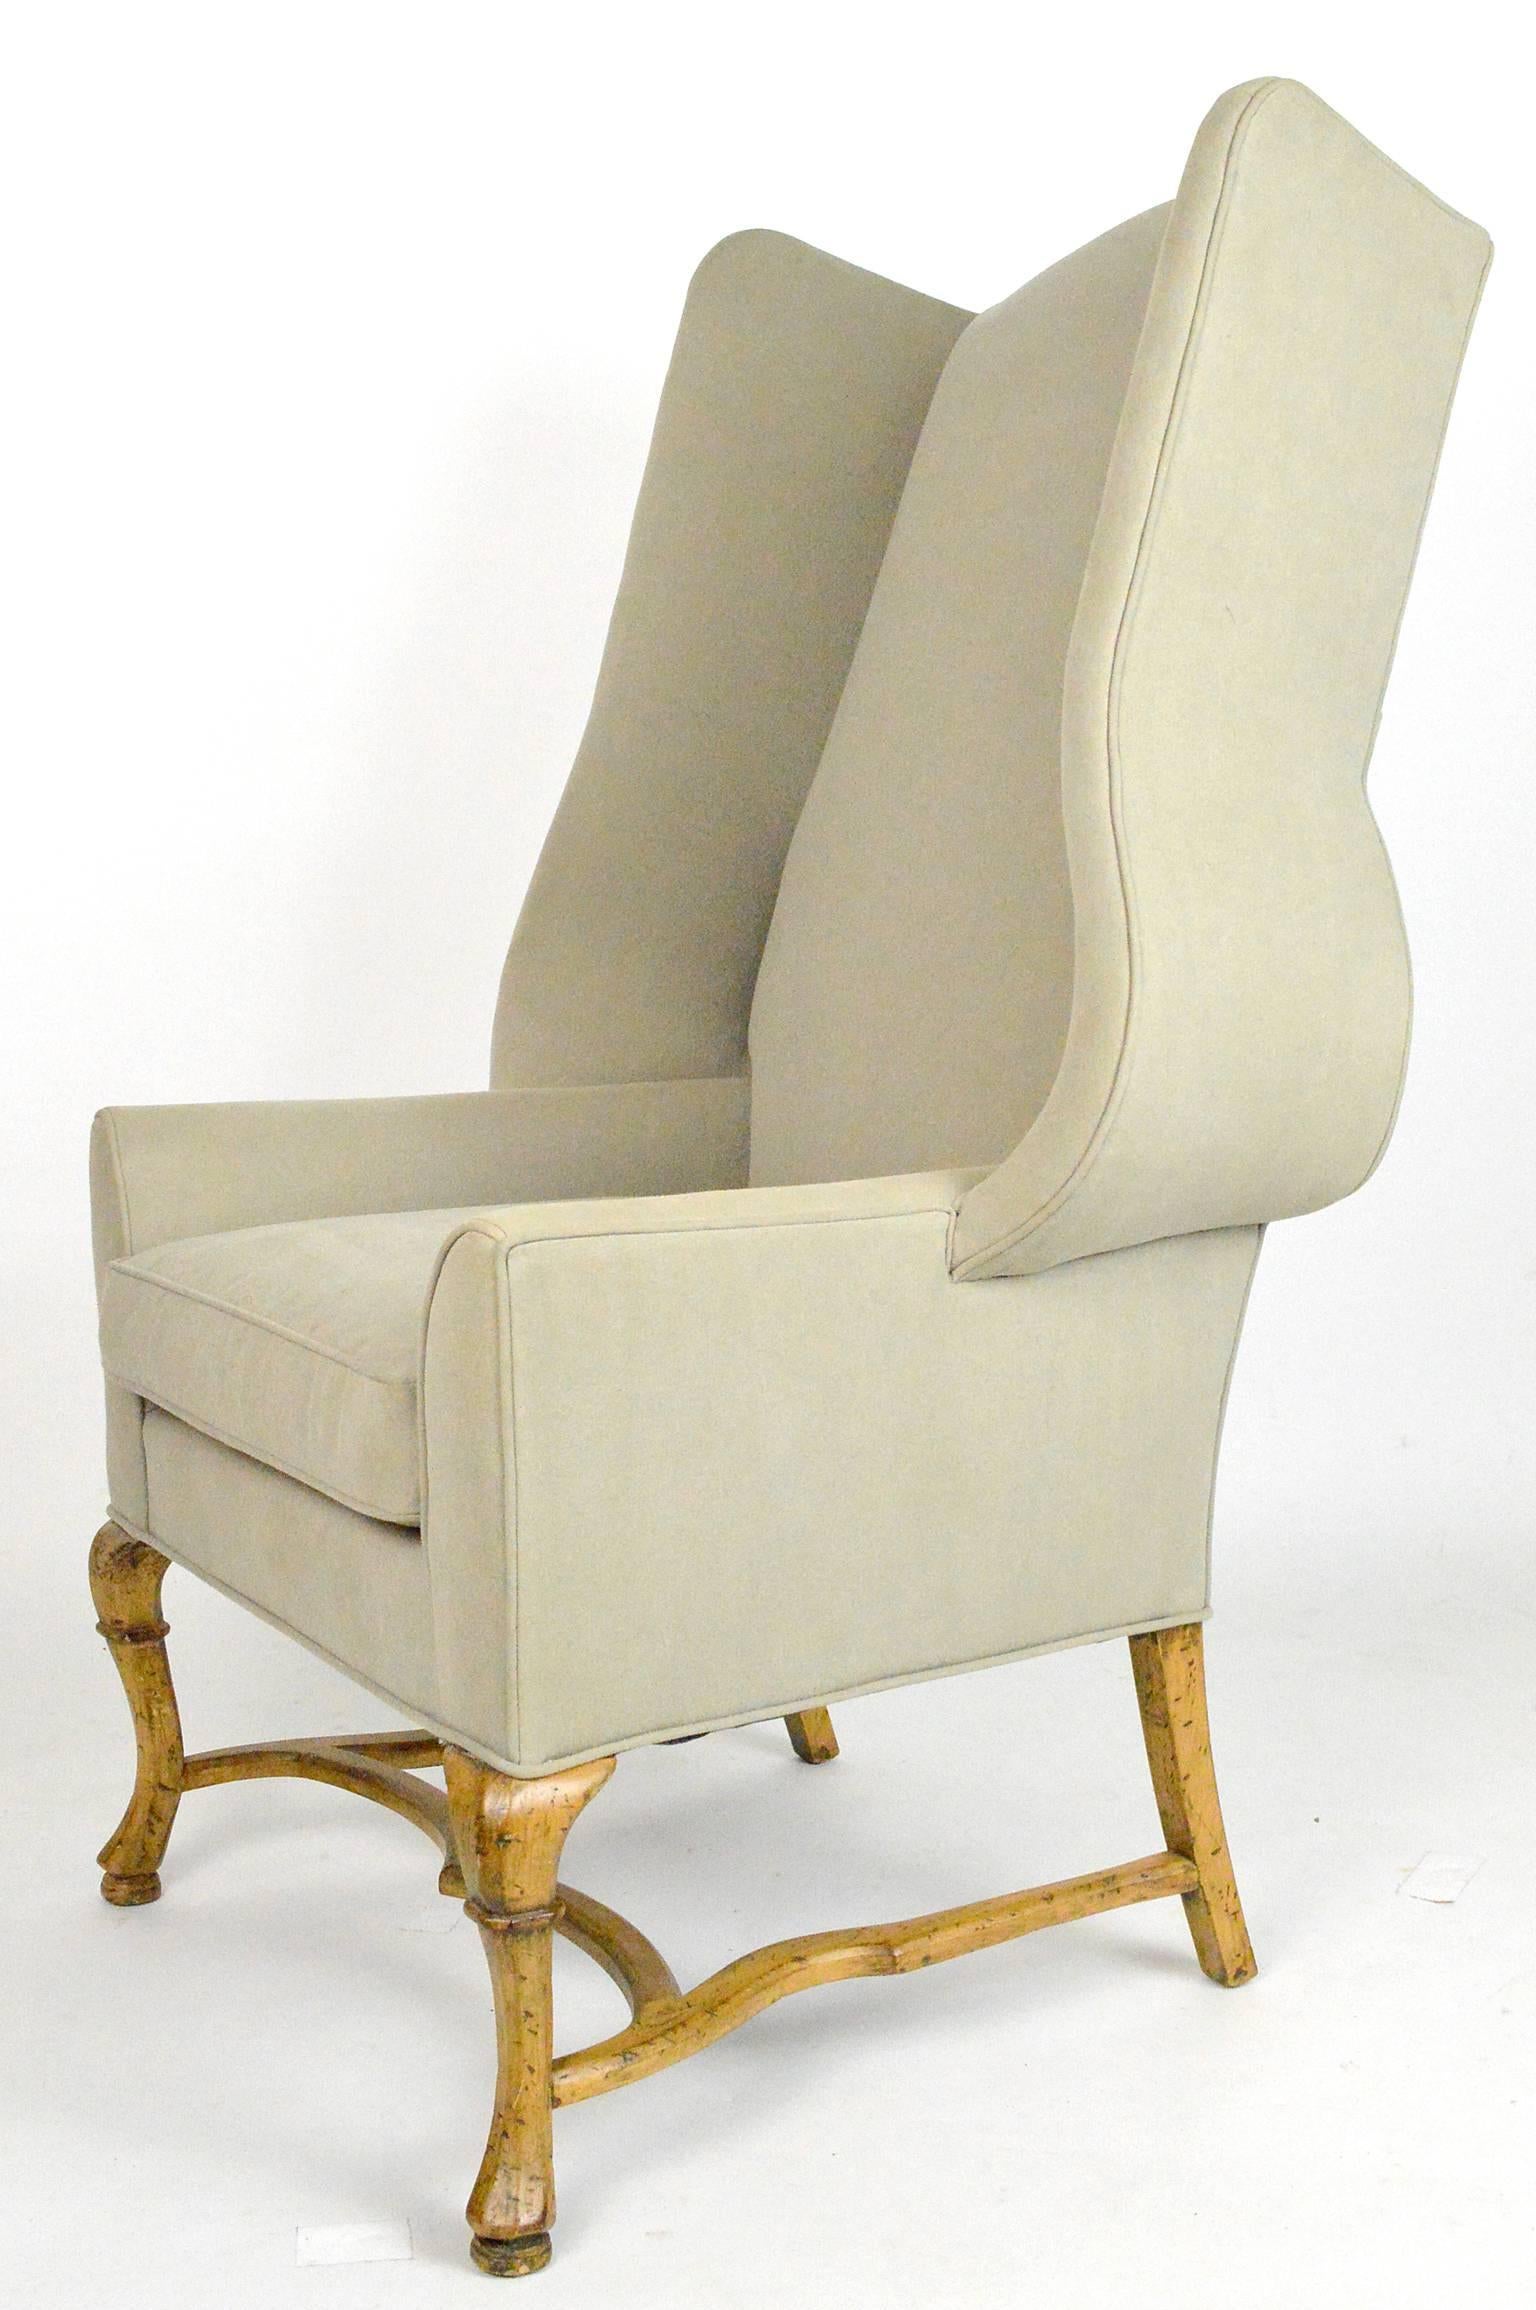 Large-scale French country style wingback chair.